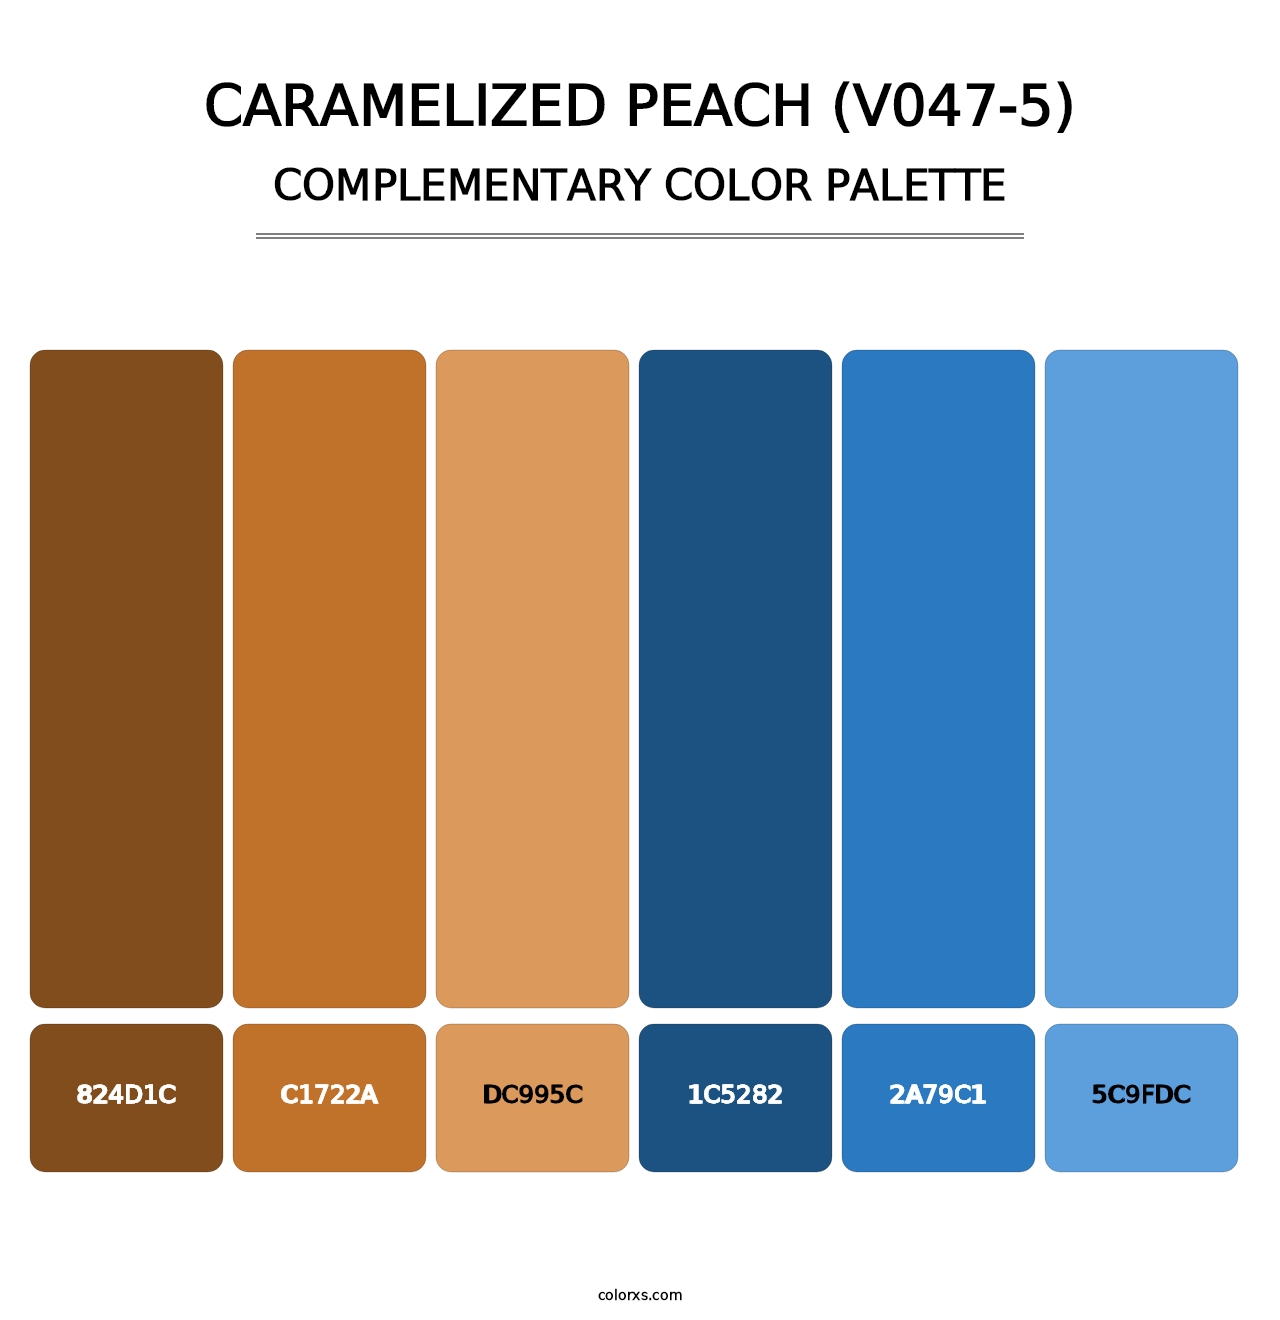 Caramelized Peach (V047-5) - Complementary Color Palette